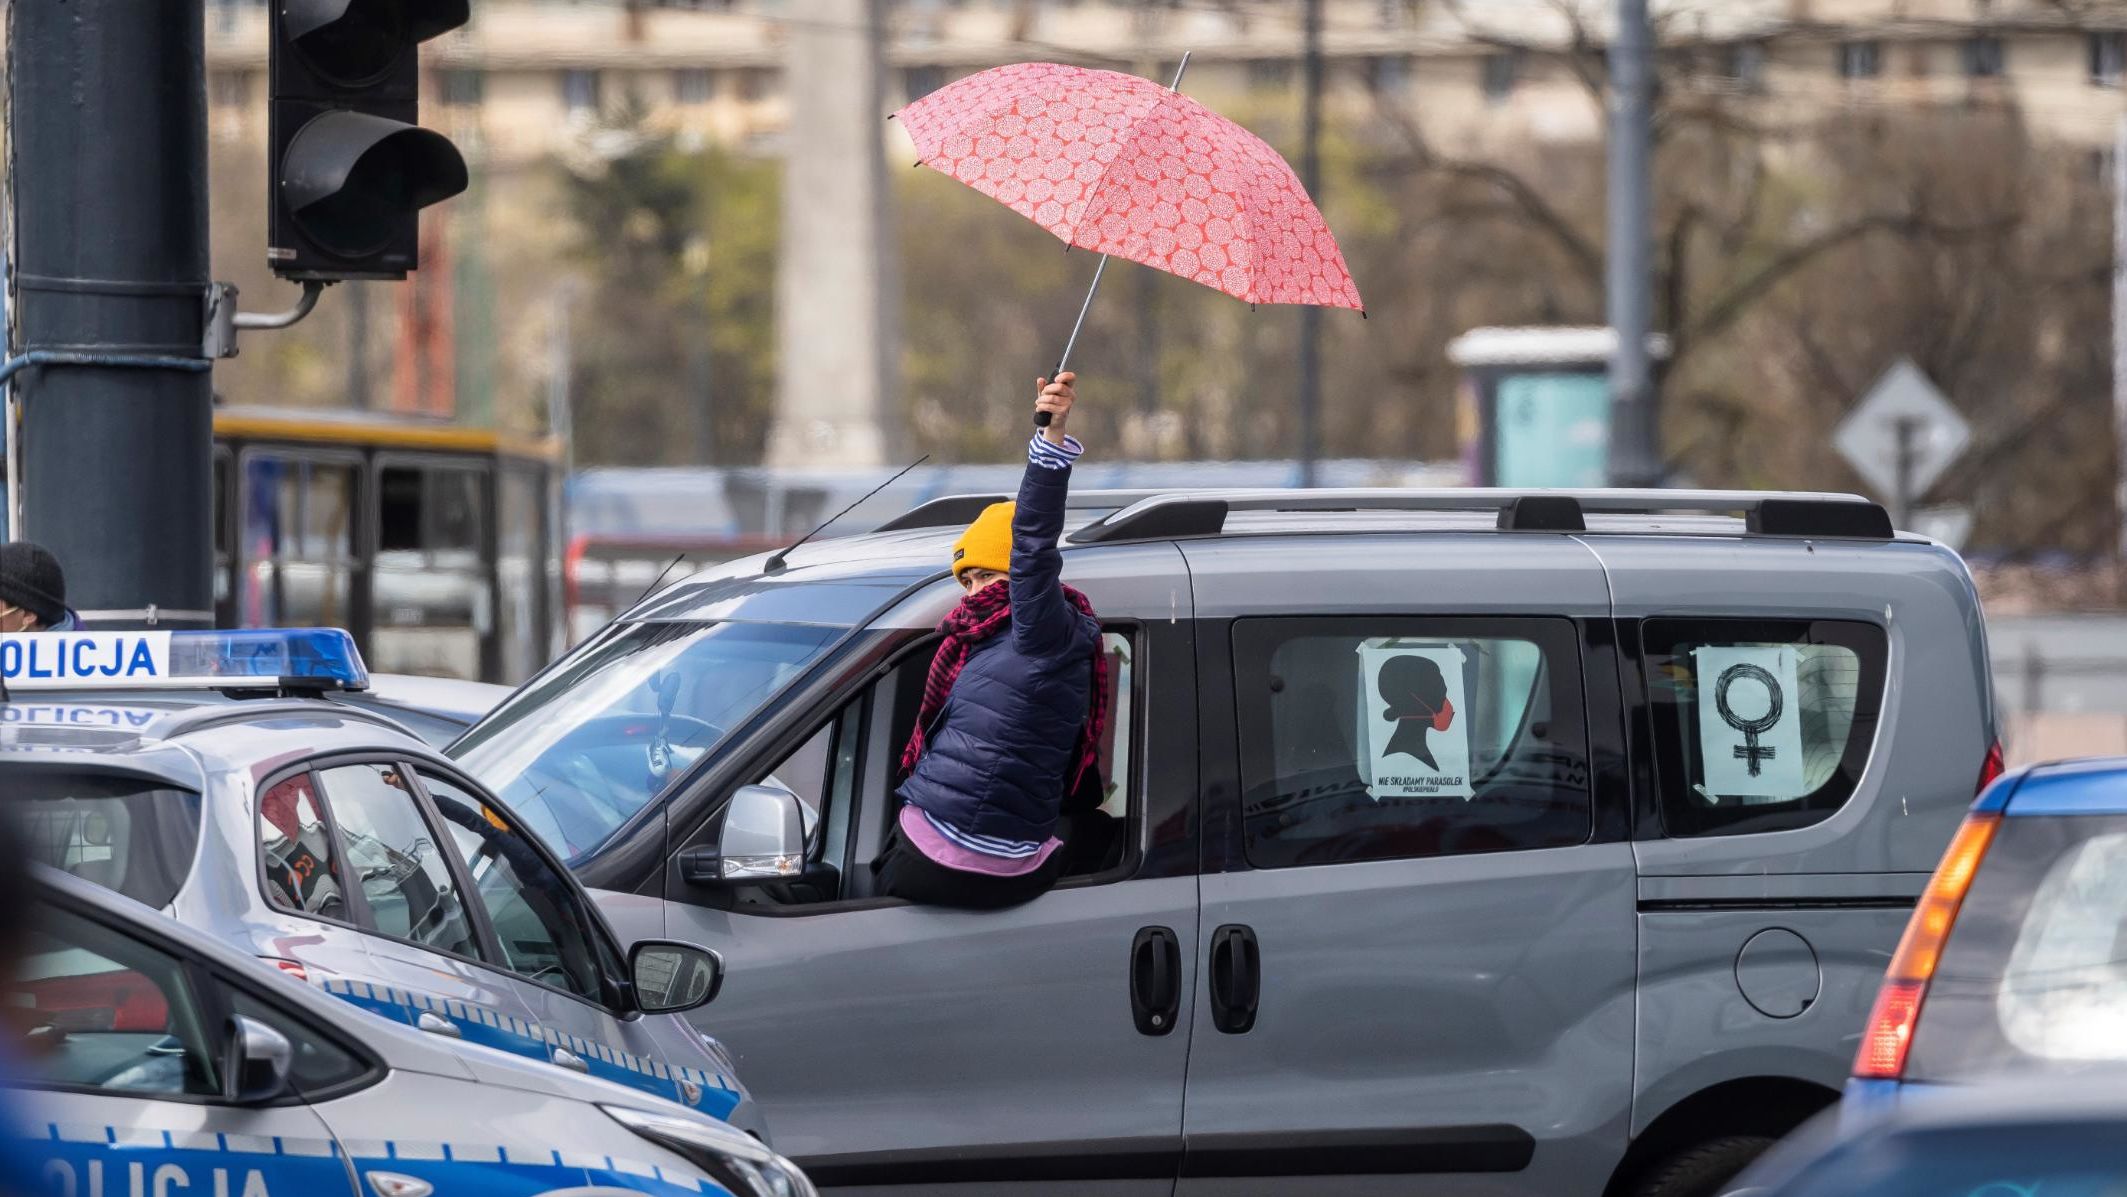 Women protest from their cars with umbrellas, a symbol of the abortion rights movement.